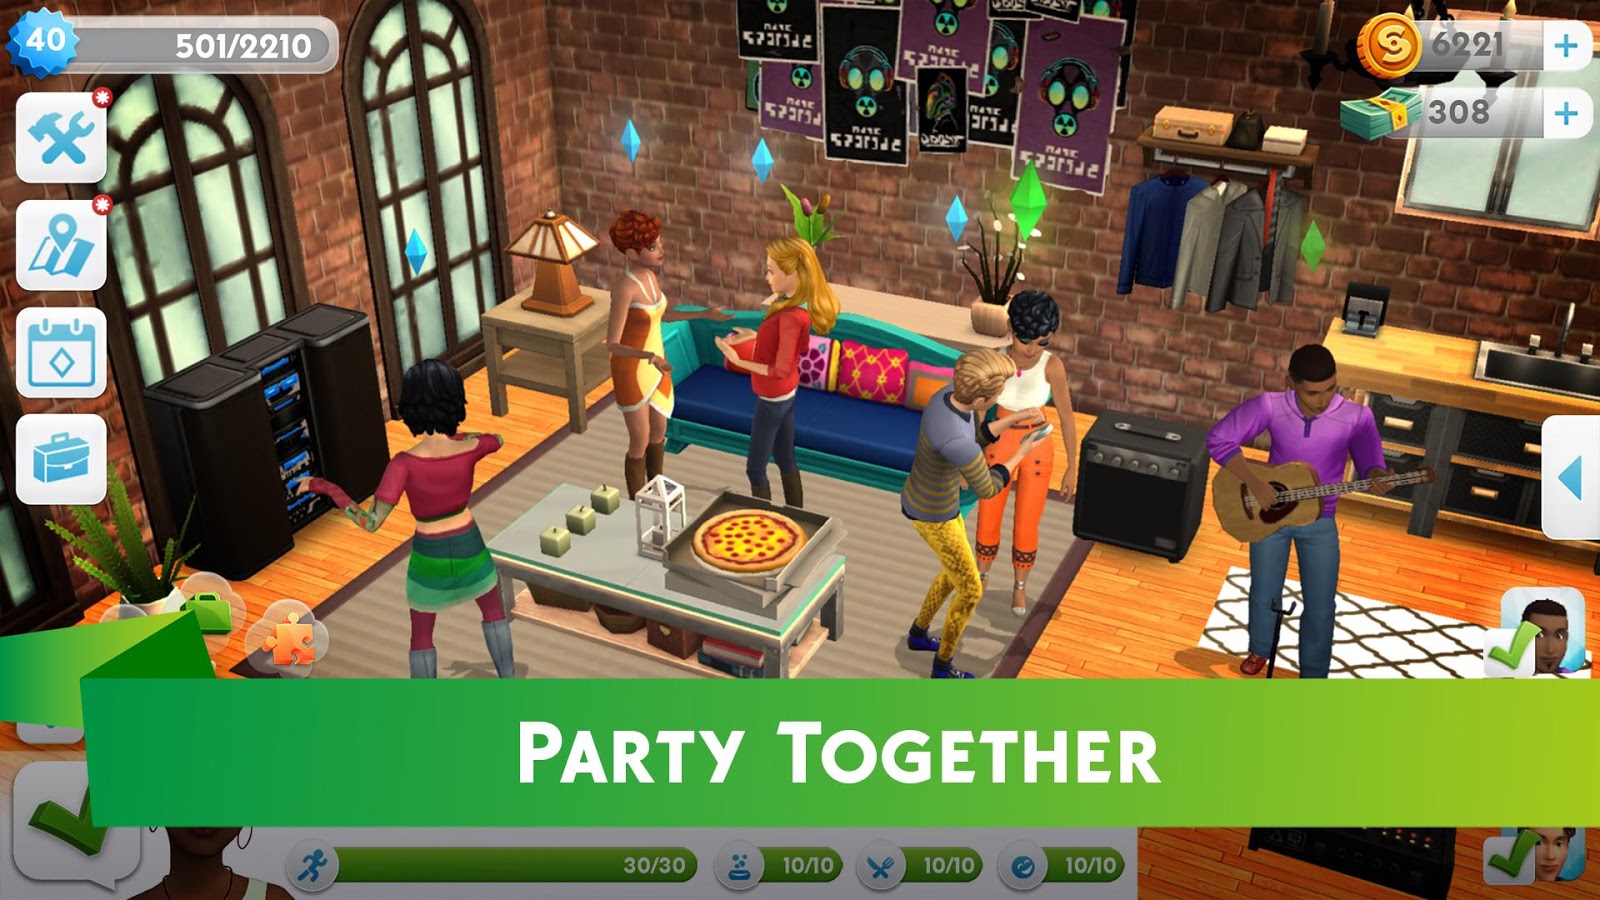 How To Download The Sims 3 For Mobile